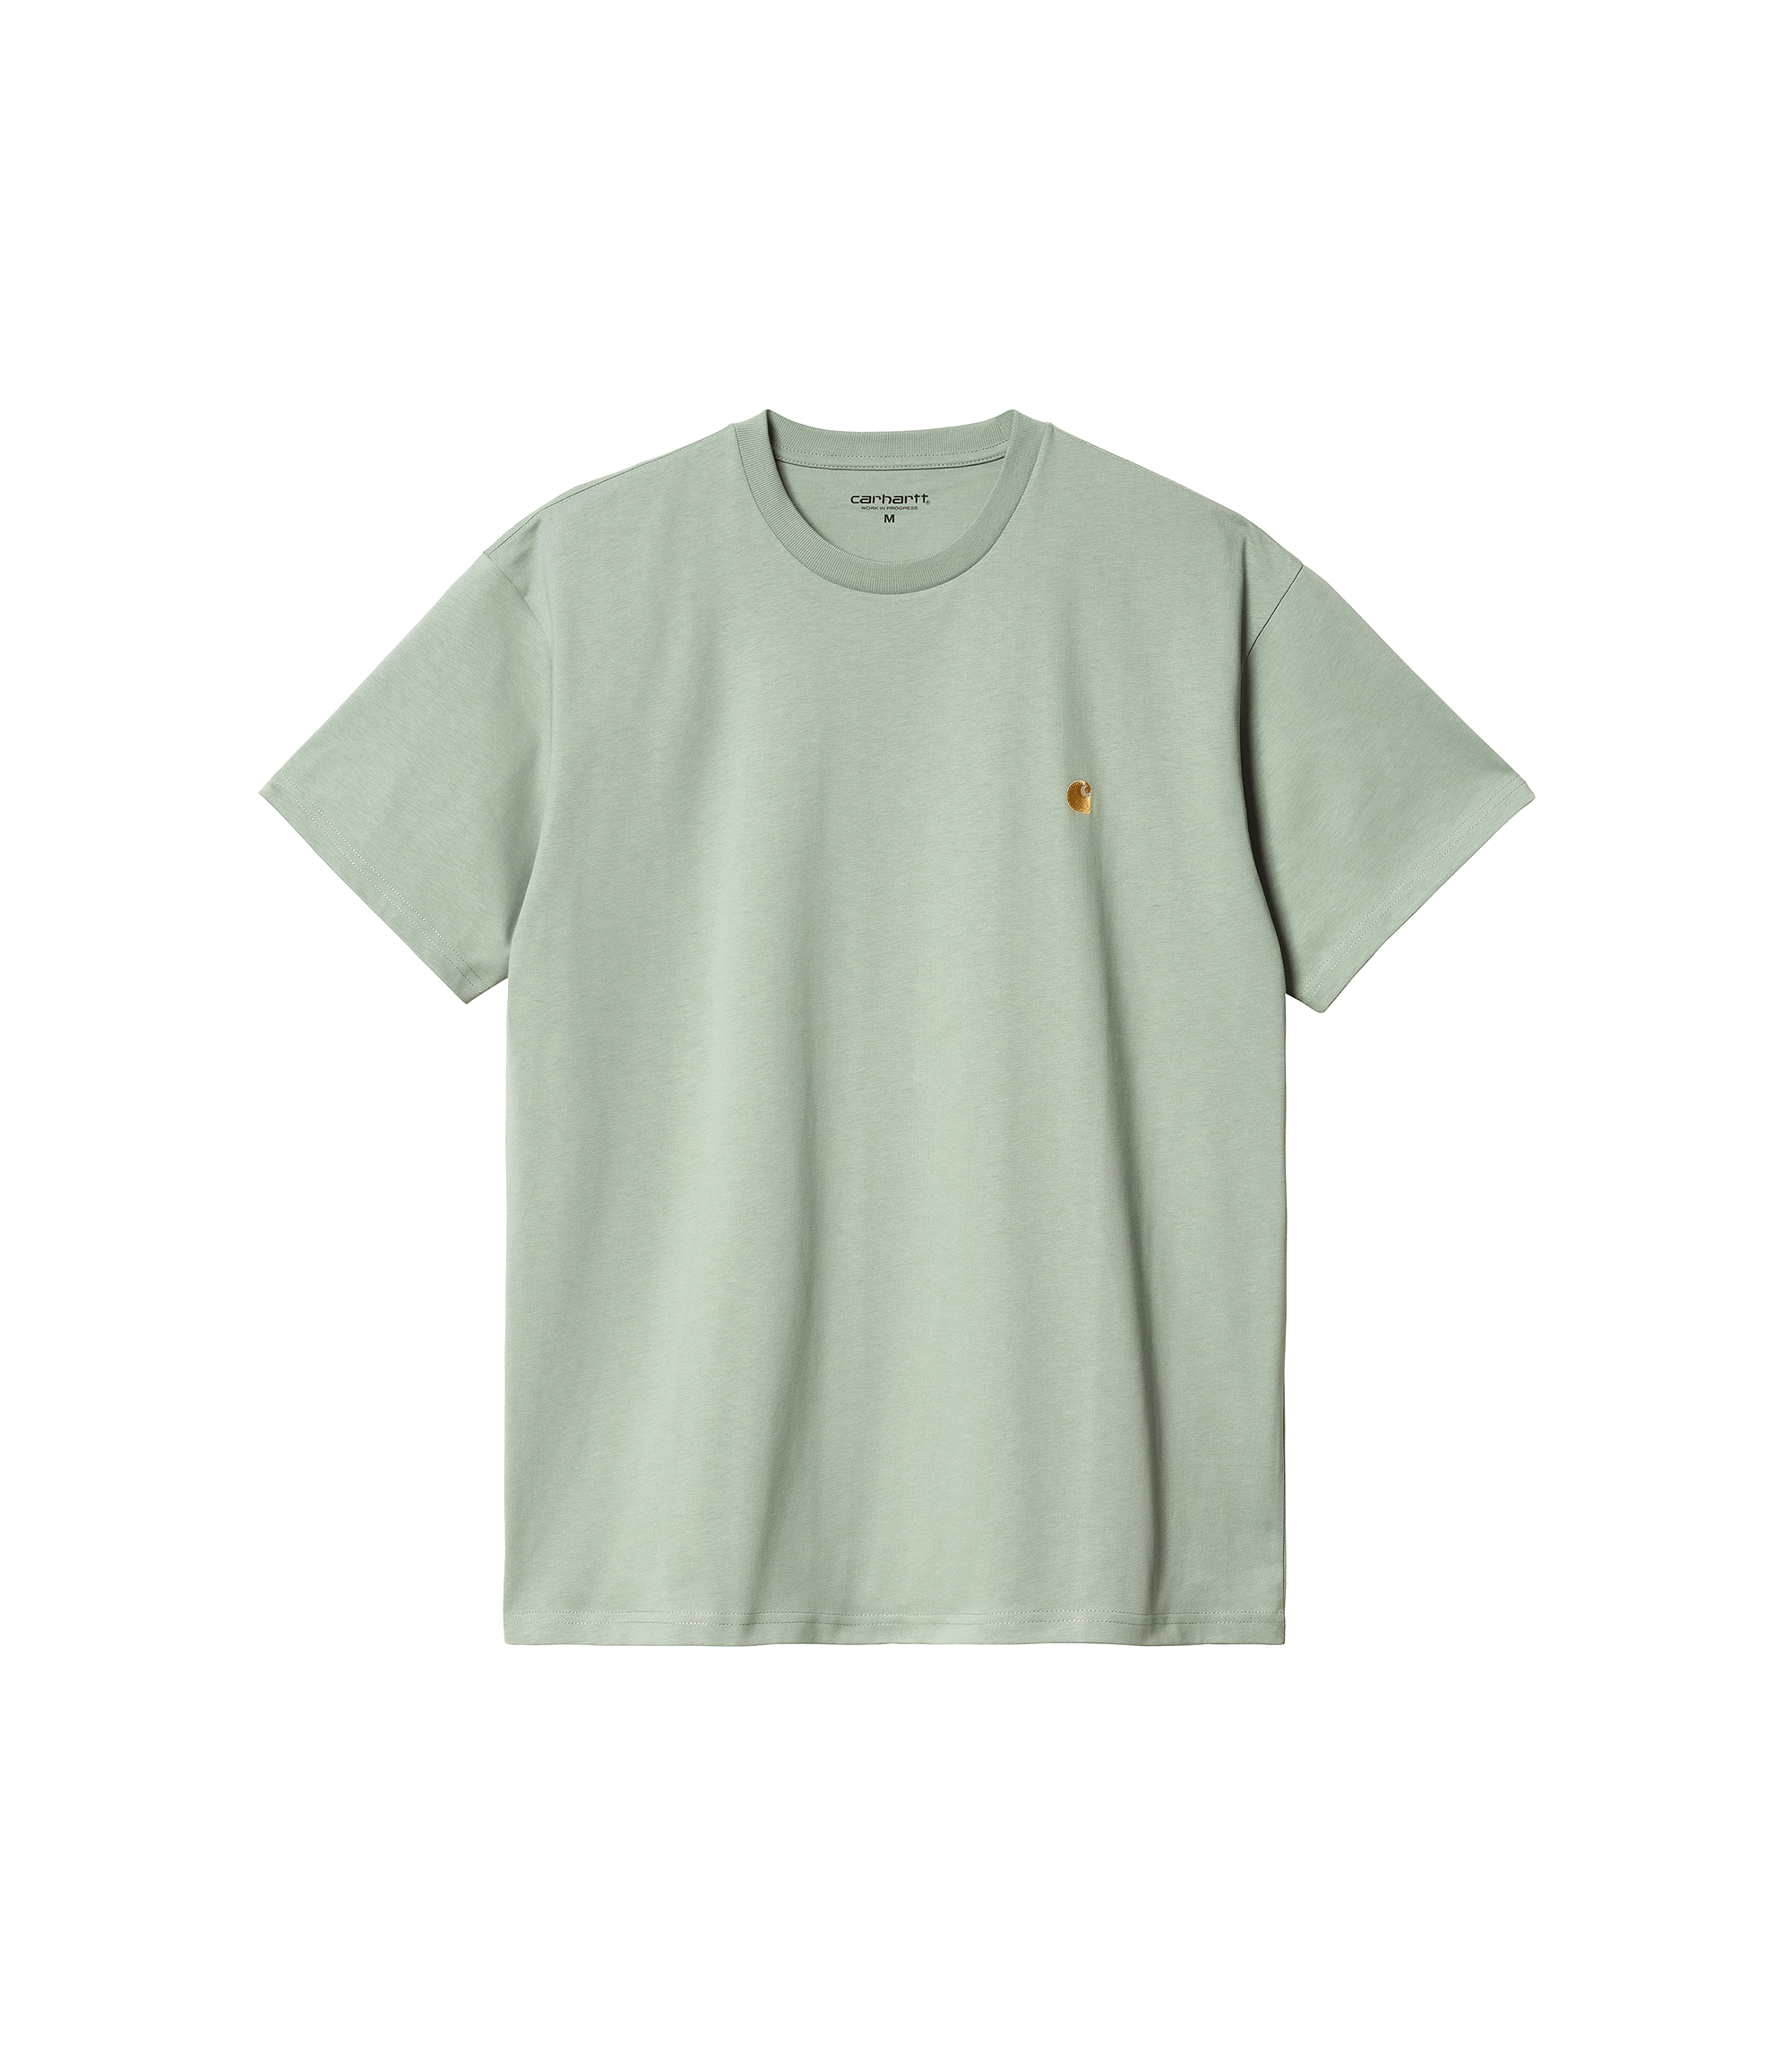 S/S Chase T-Shirt - Glassy Teal / Gold